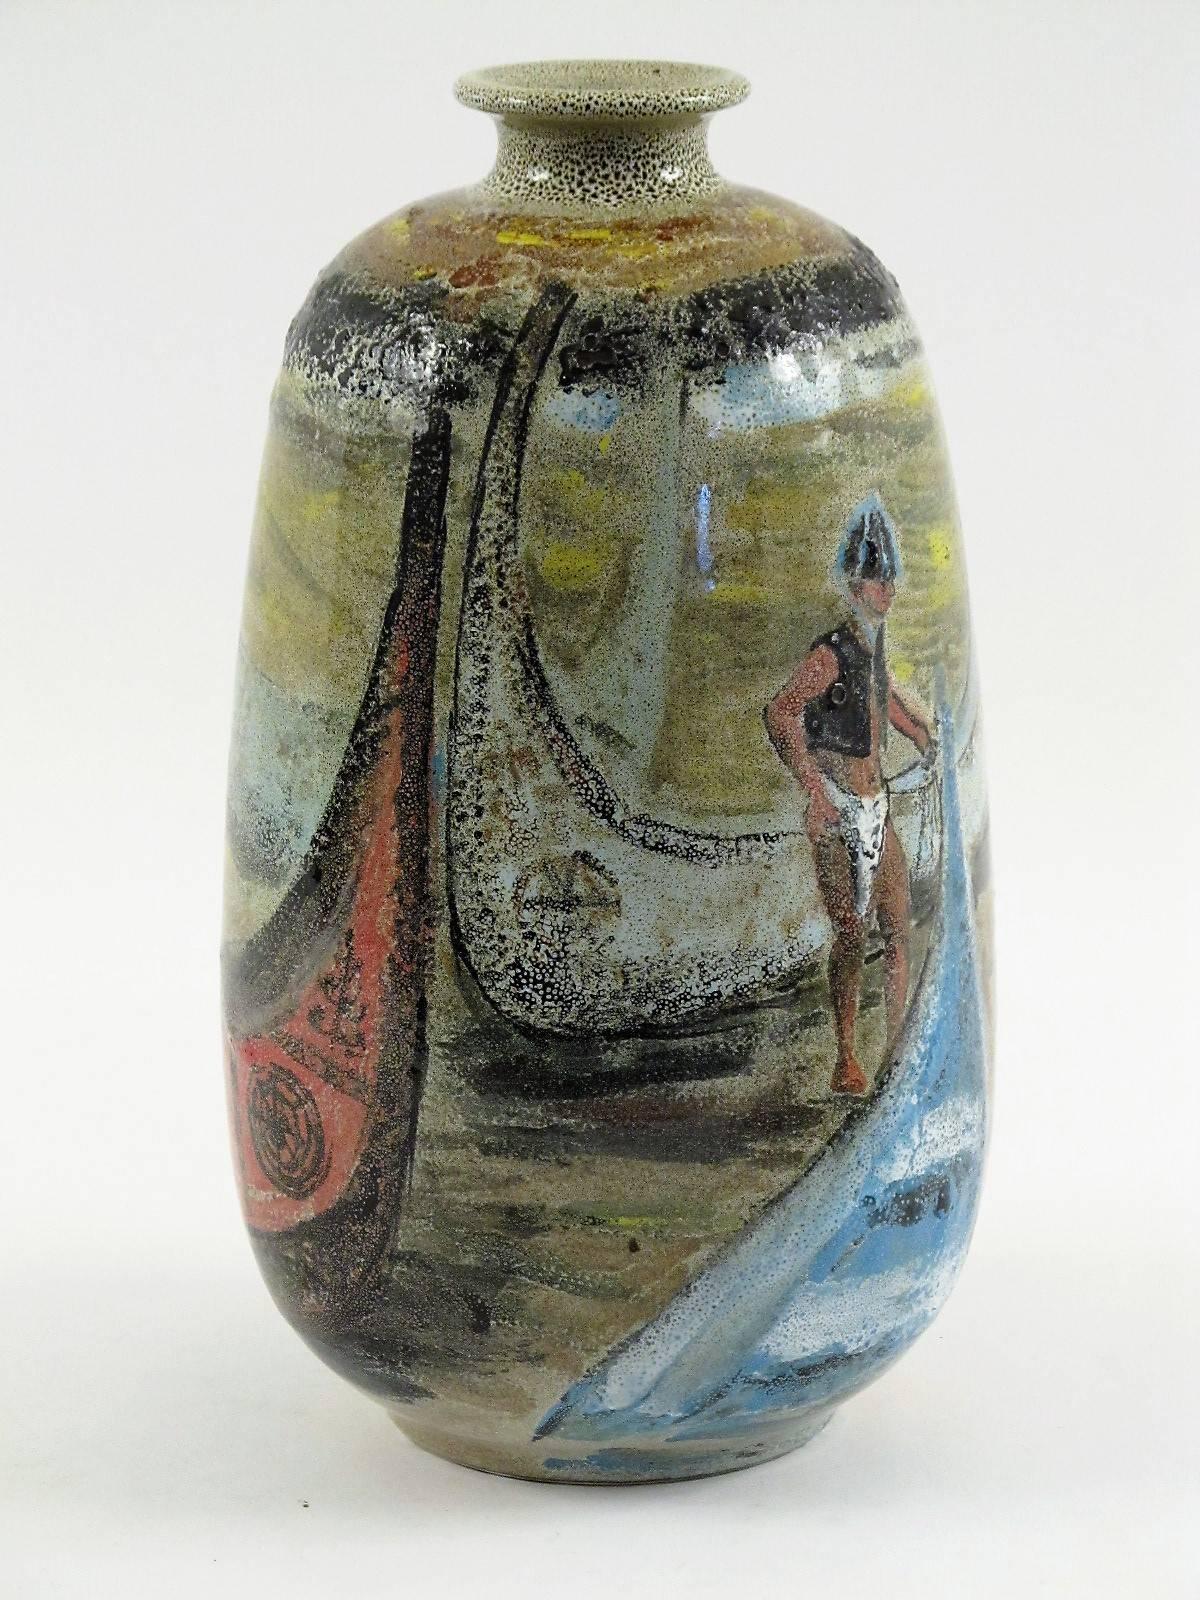 Glazed Unsigned Japanese Ceramic Vase with Sailors and Boats